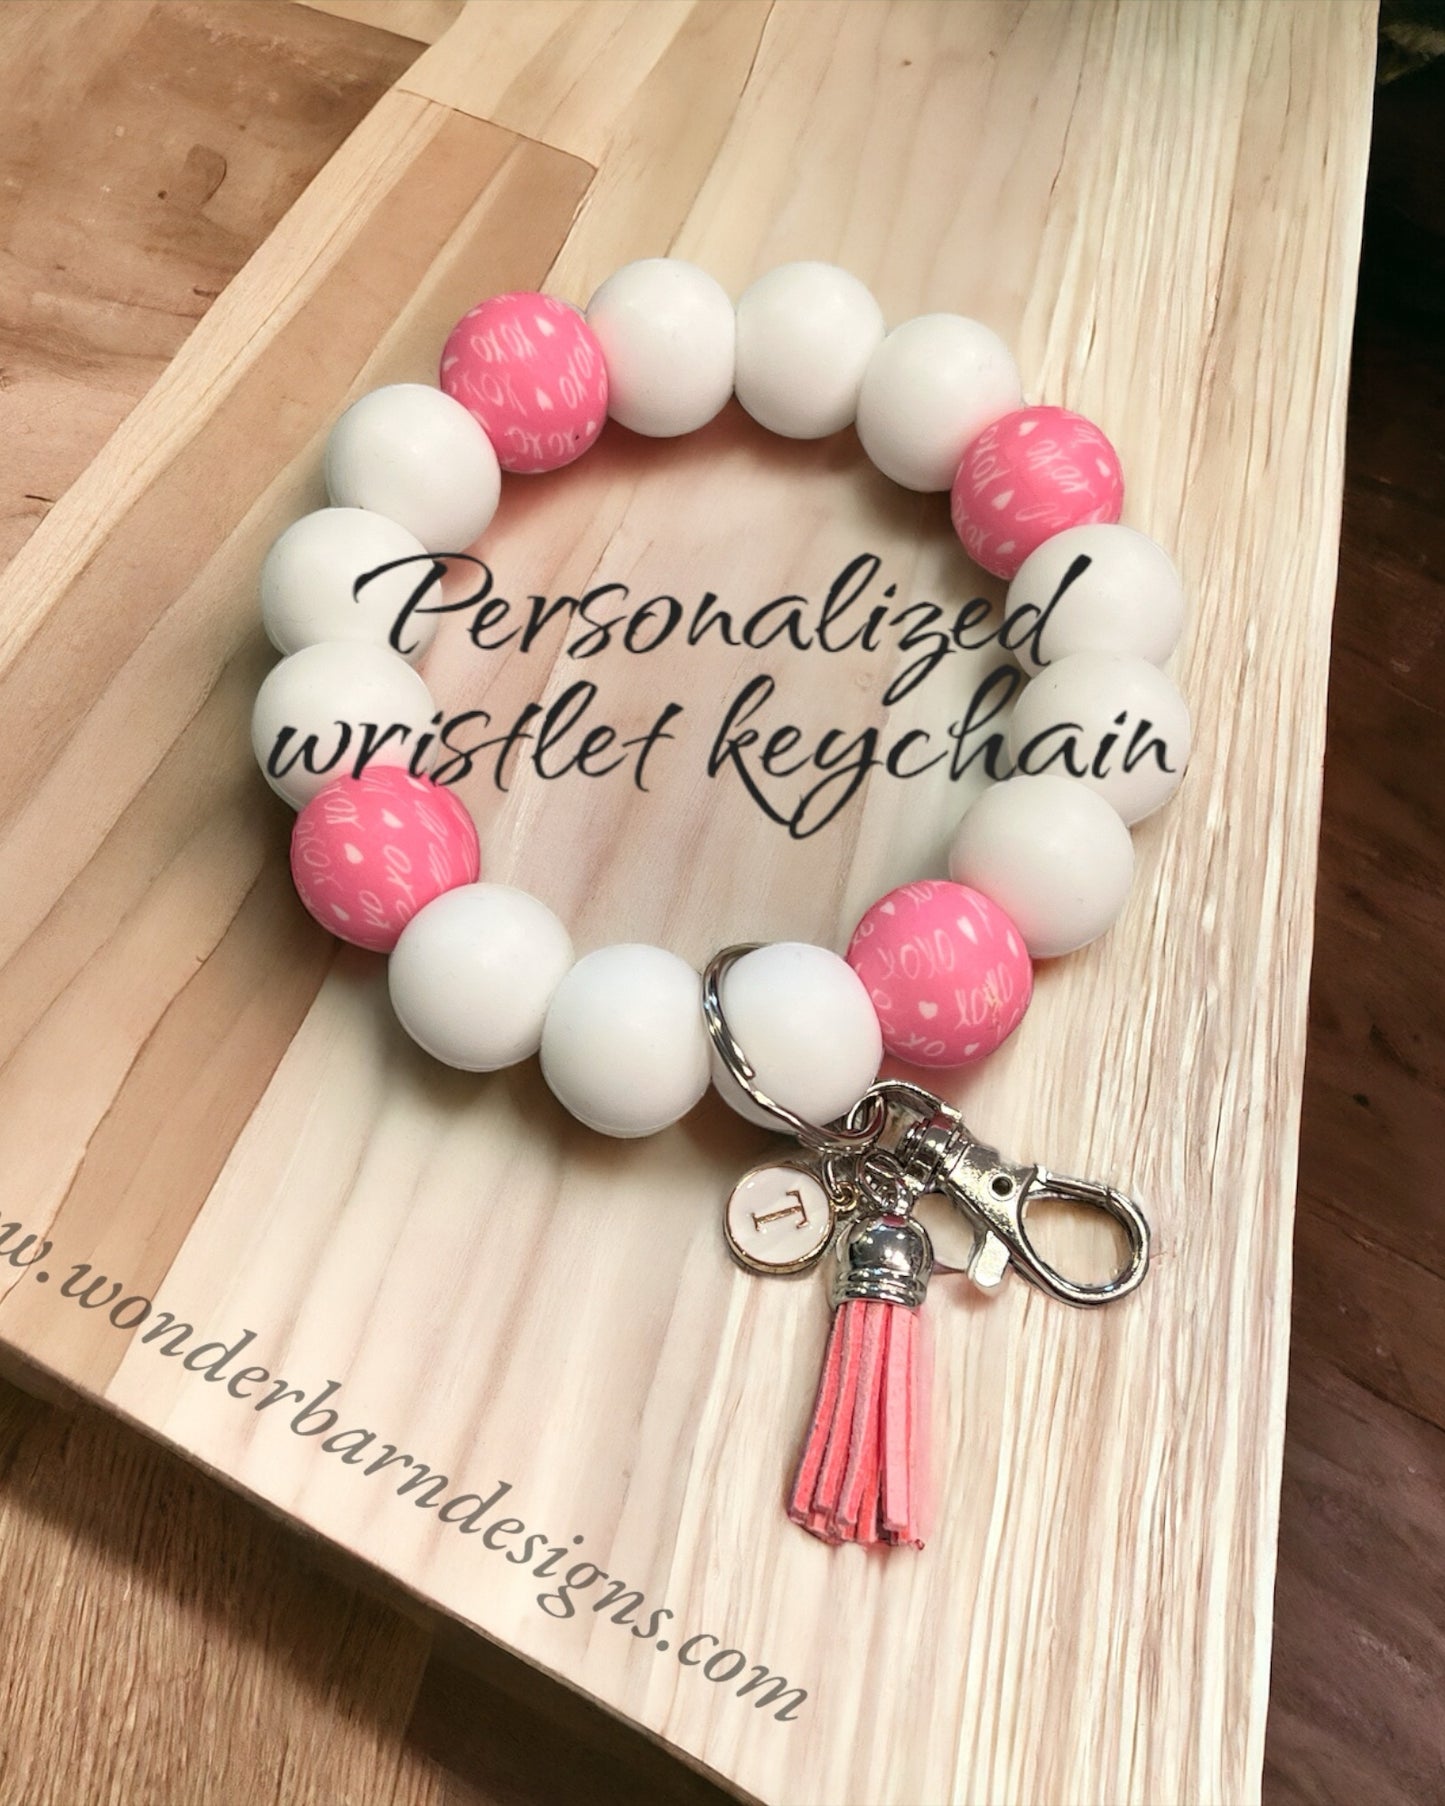 Personalized beaded bangle wristlet keychain with optional embroidered wallet